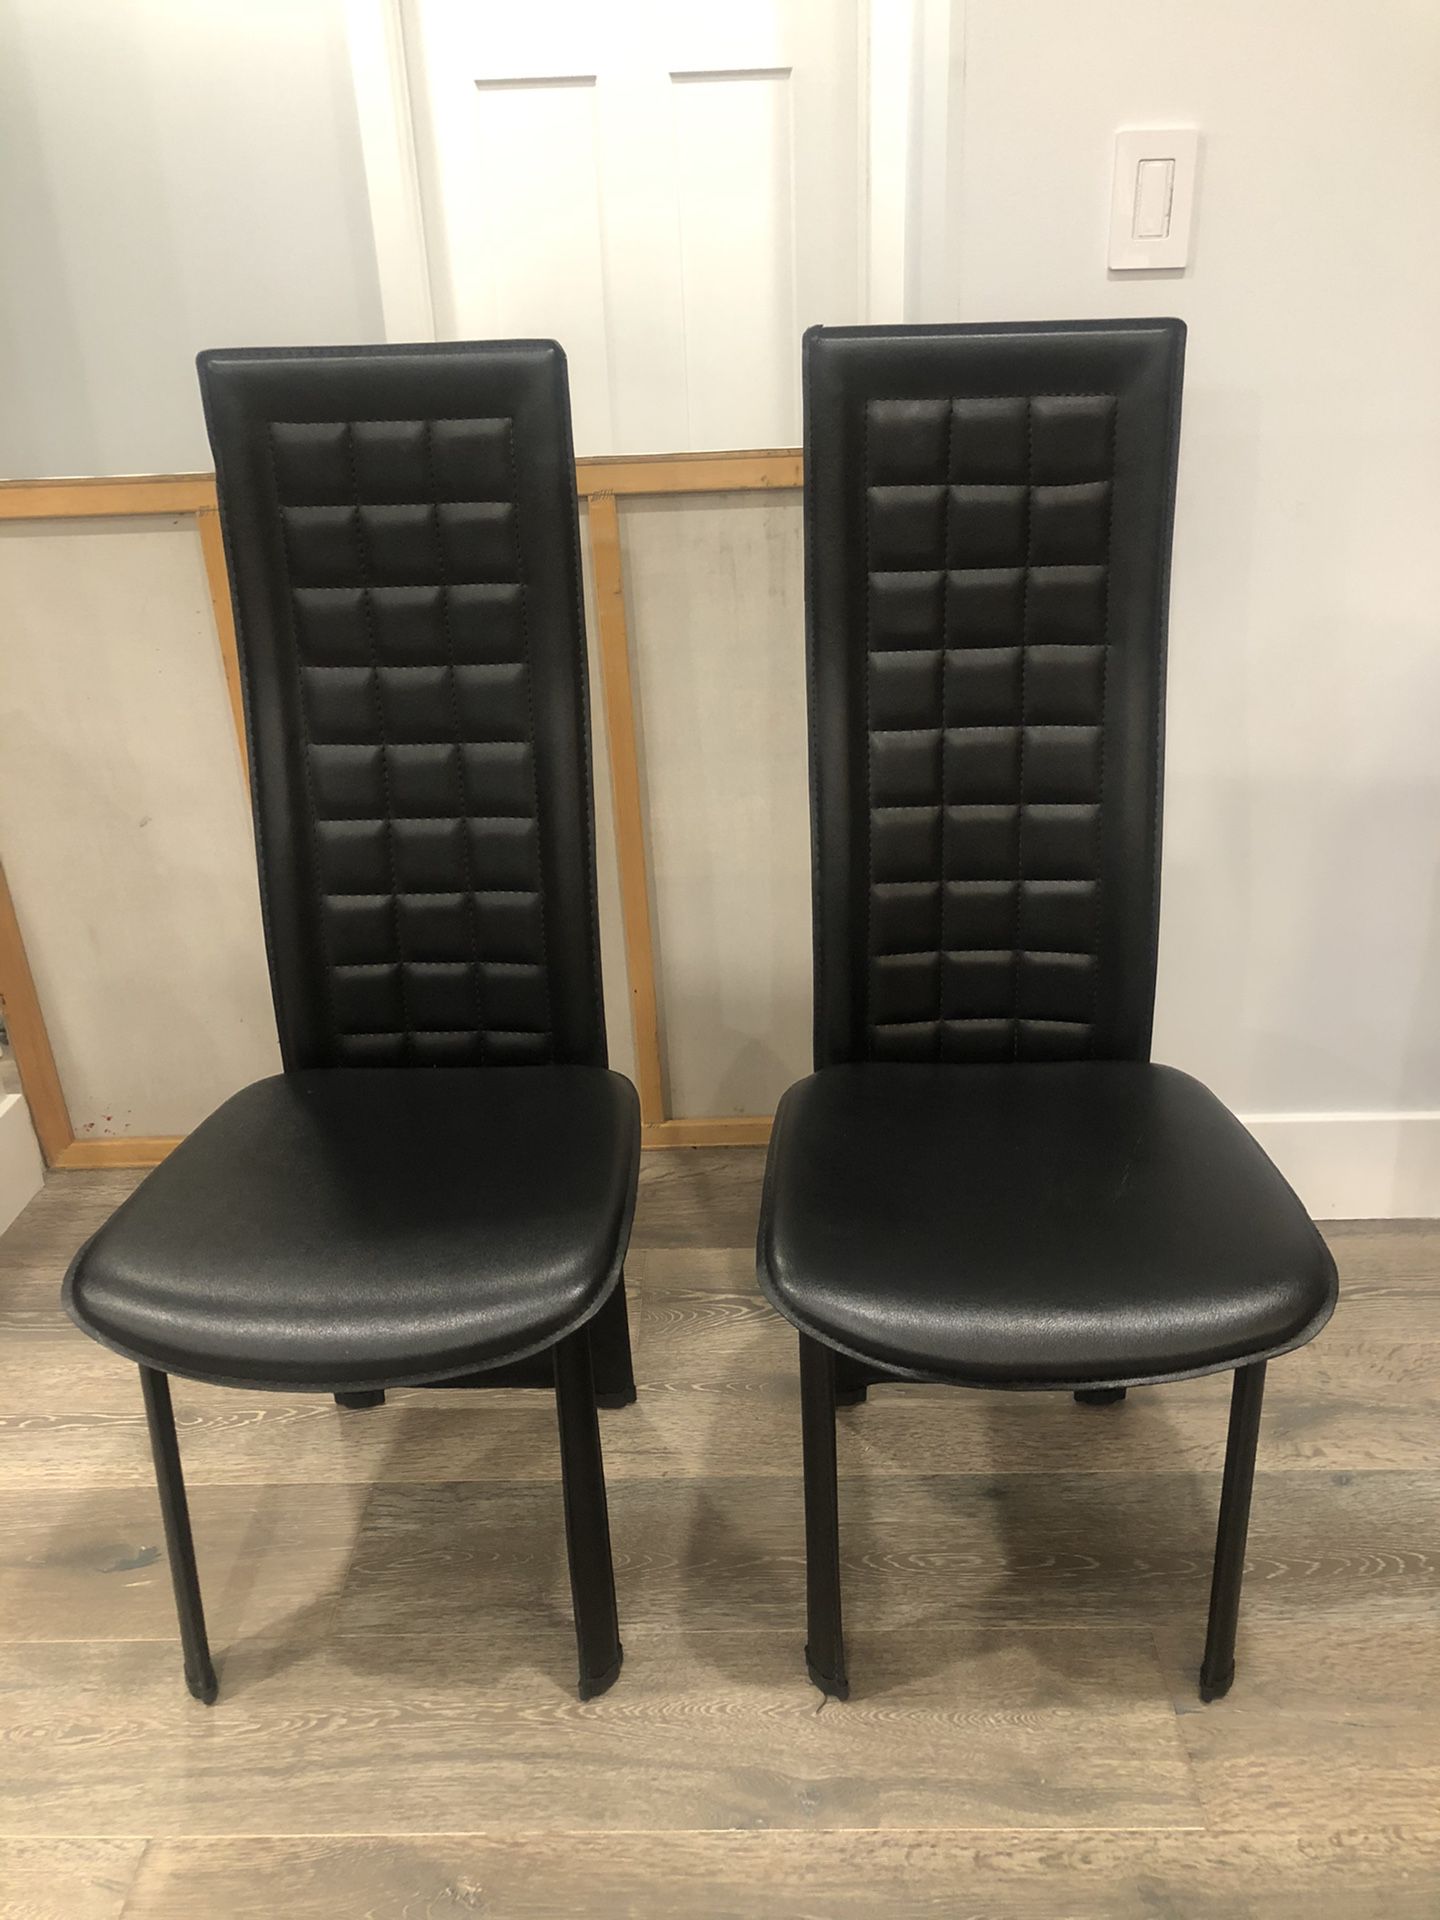 Modern black chairs! Set of 2. $50 for both chairs.